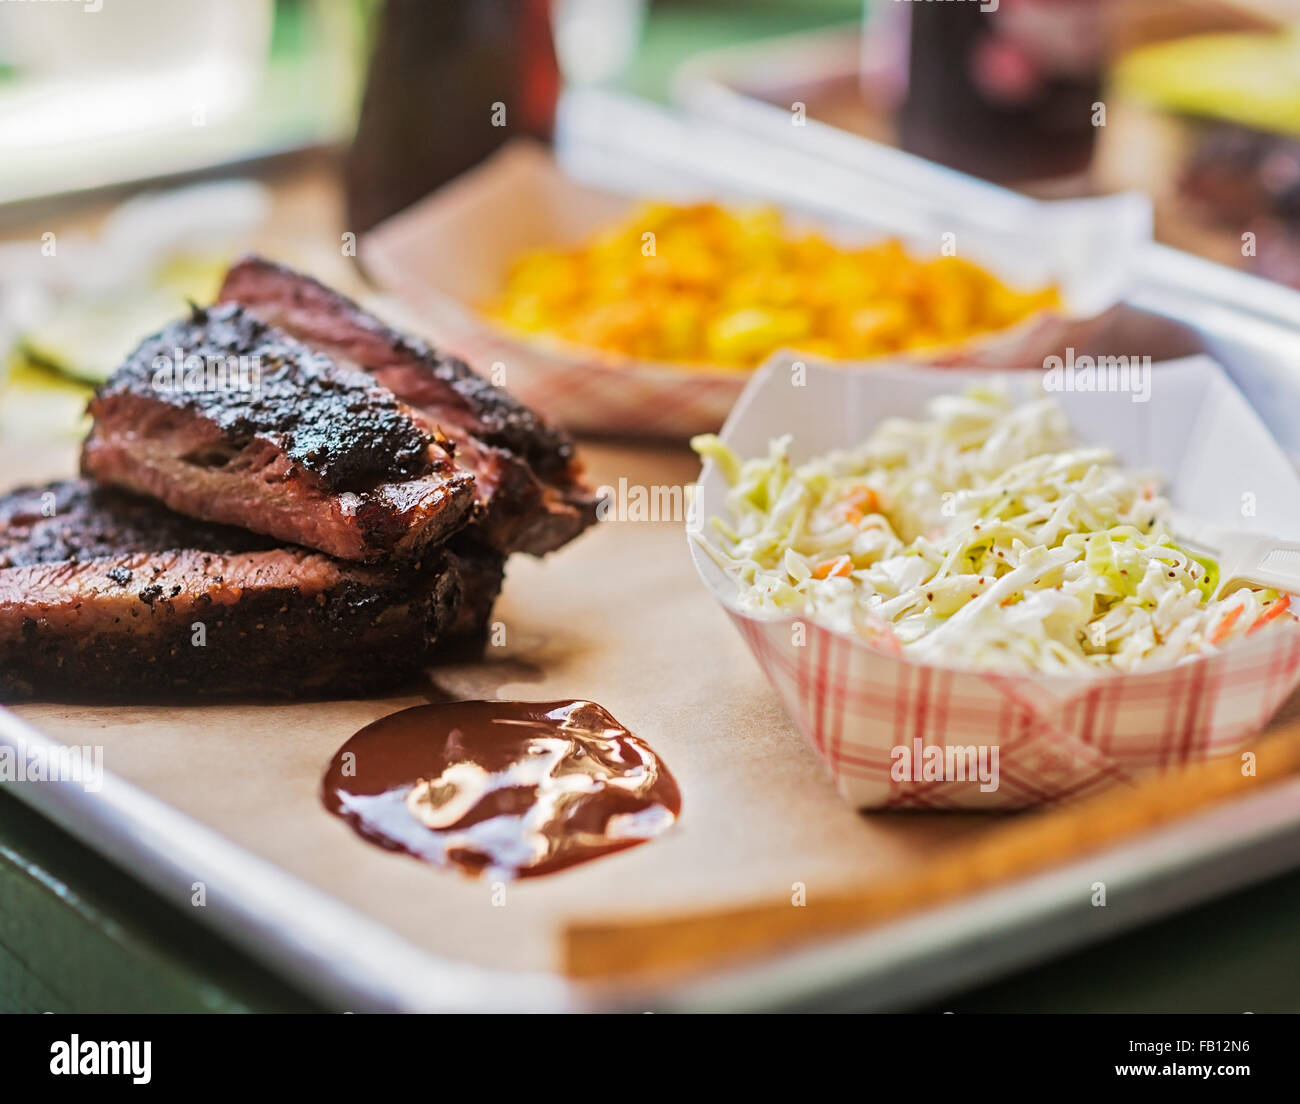 Grilled meat and salad Stock Photo